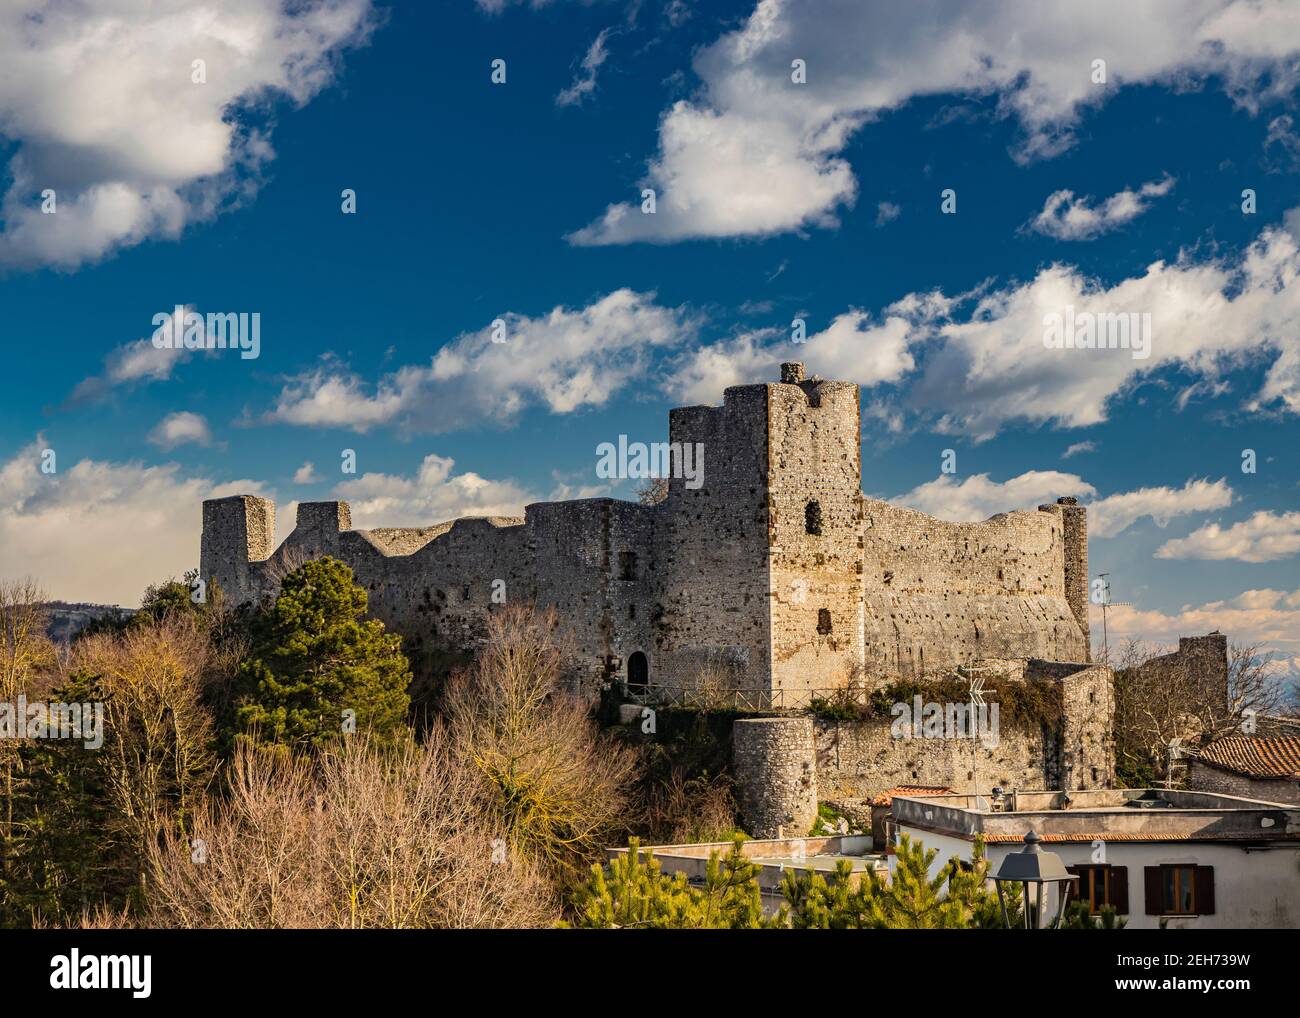 The small medieval village of Castel San Pietro Romano, Lazio, province of Rome, Palestrina. The remains of the ancient medieval castle, with its towe Stock Photo